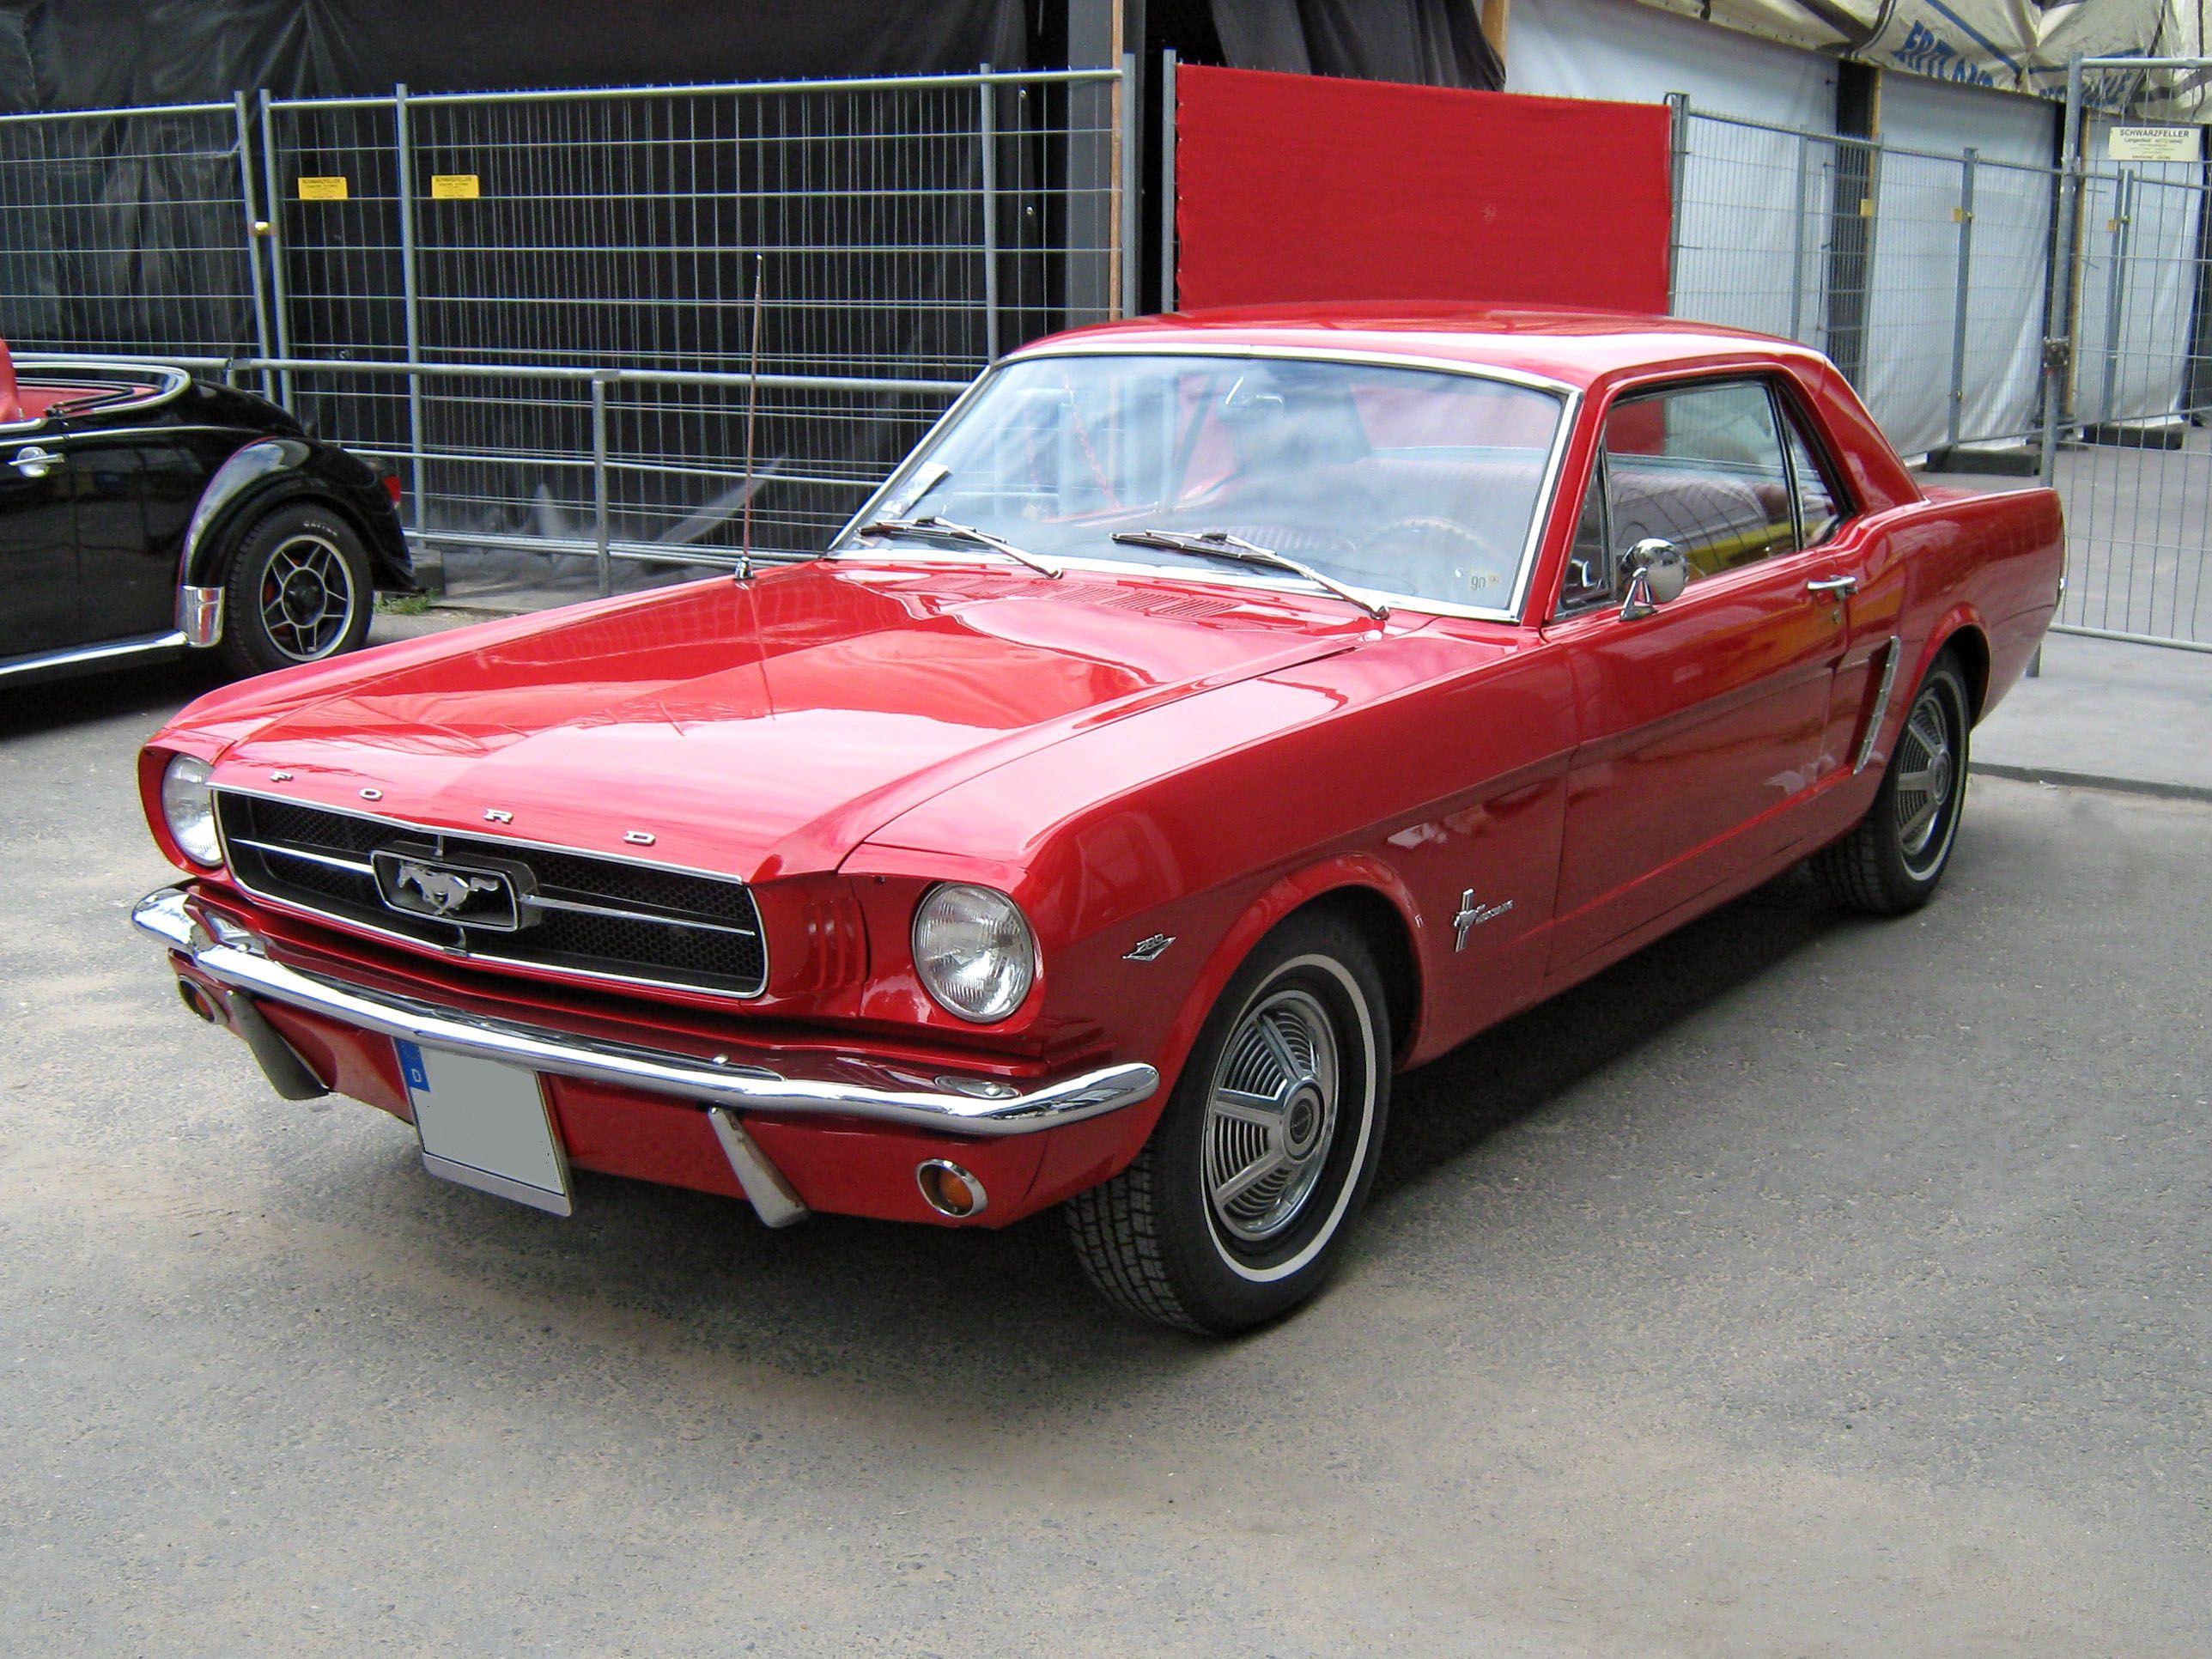 First-generation Ford Mustang